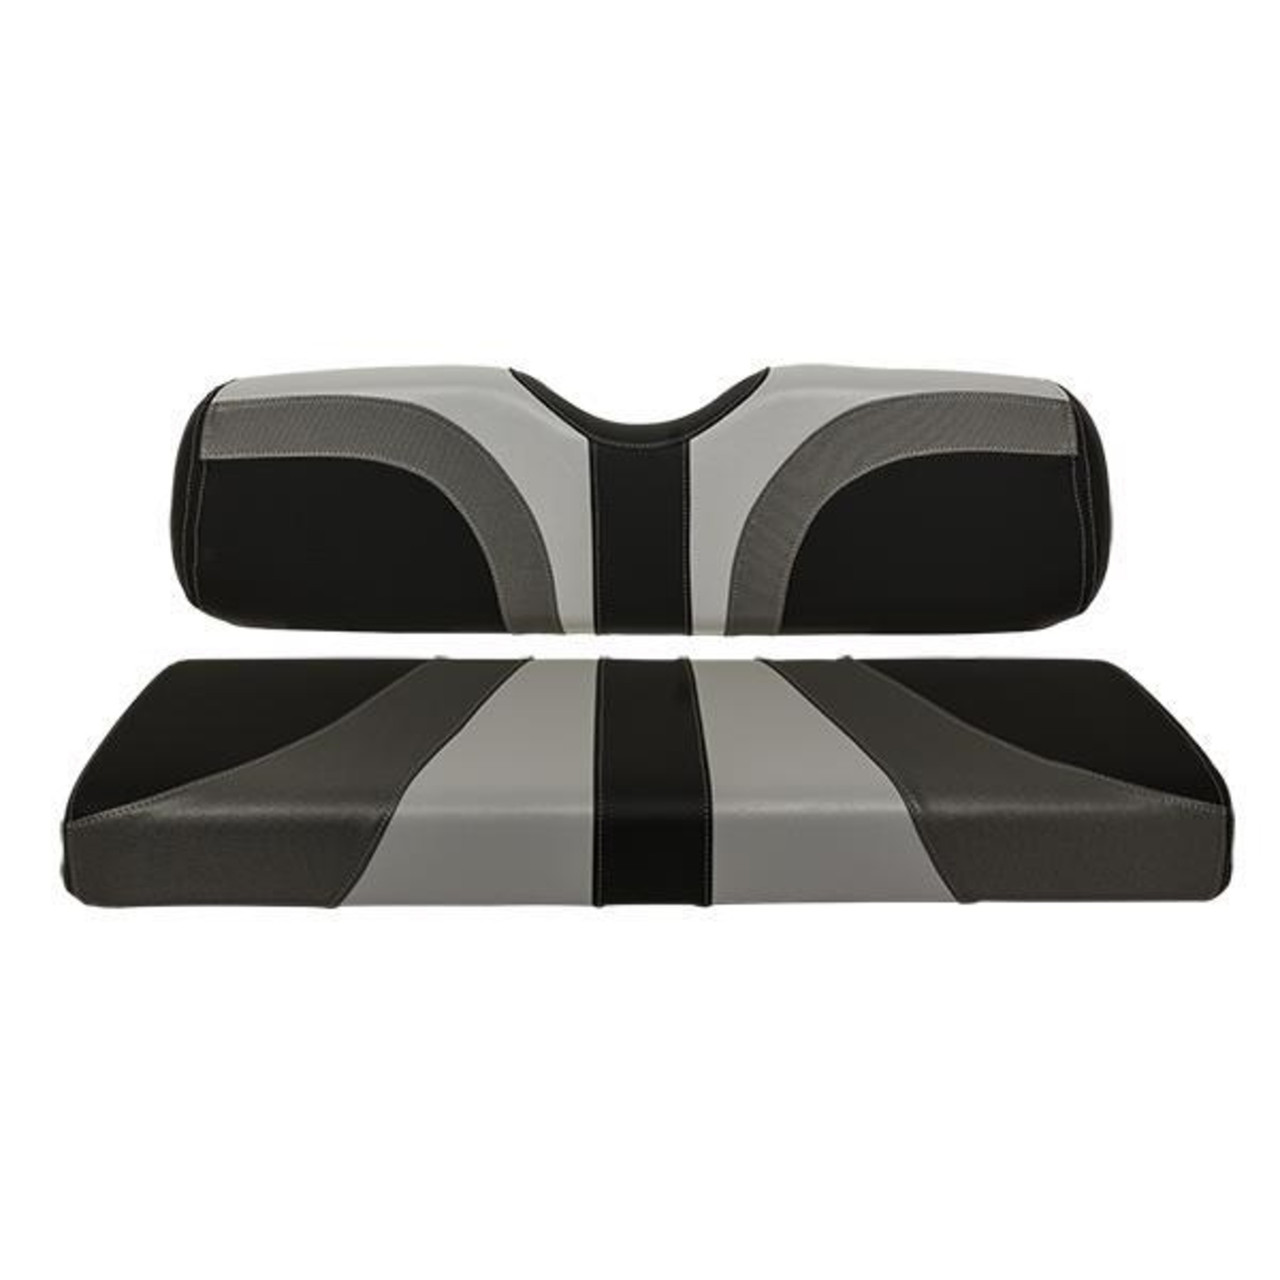 RedDot® Blade Front Seat Covers for Club Car Precedent – Gray / Charcoal Gear / Black Carbon Fiber